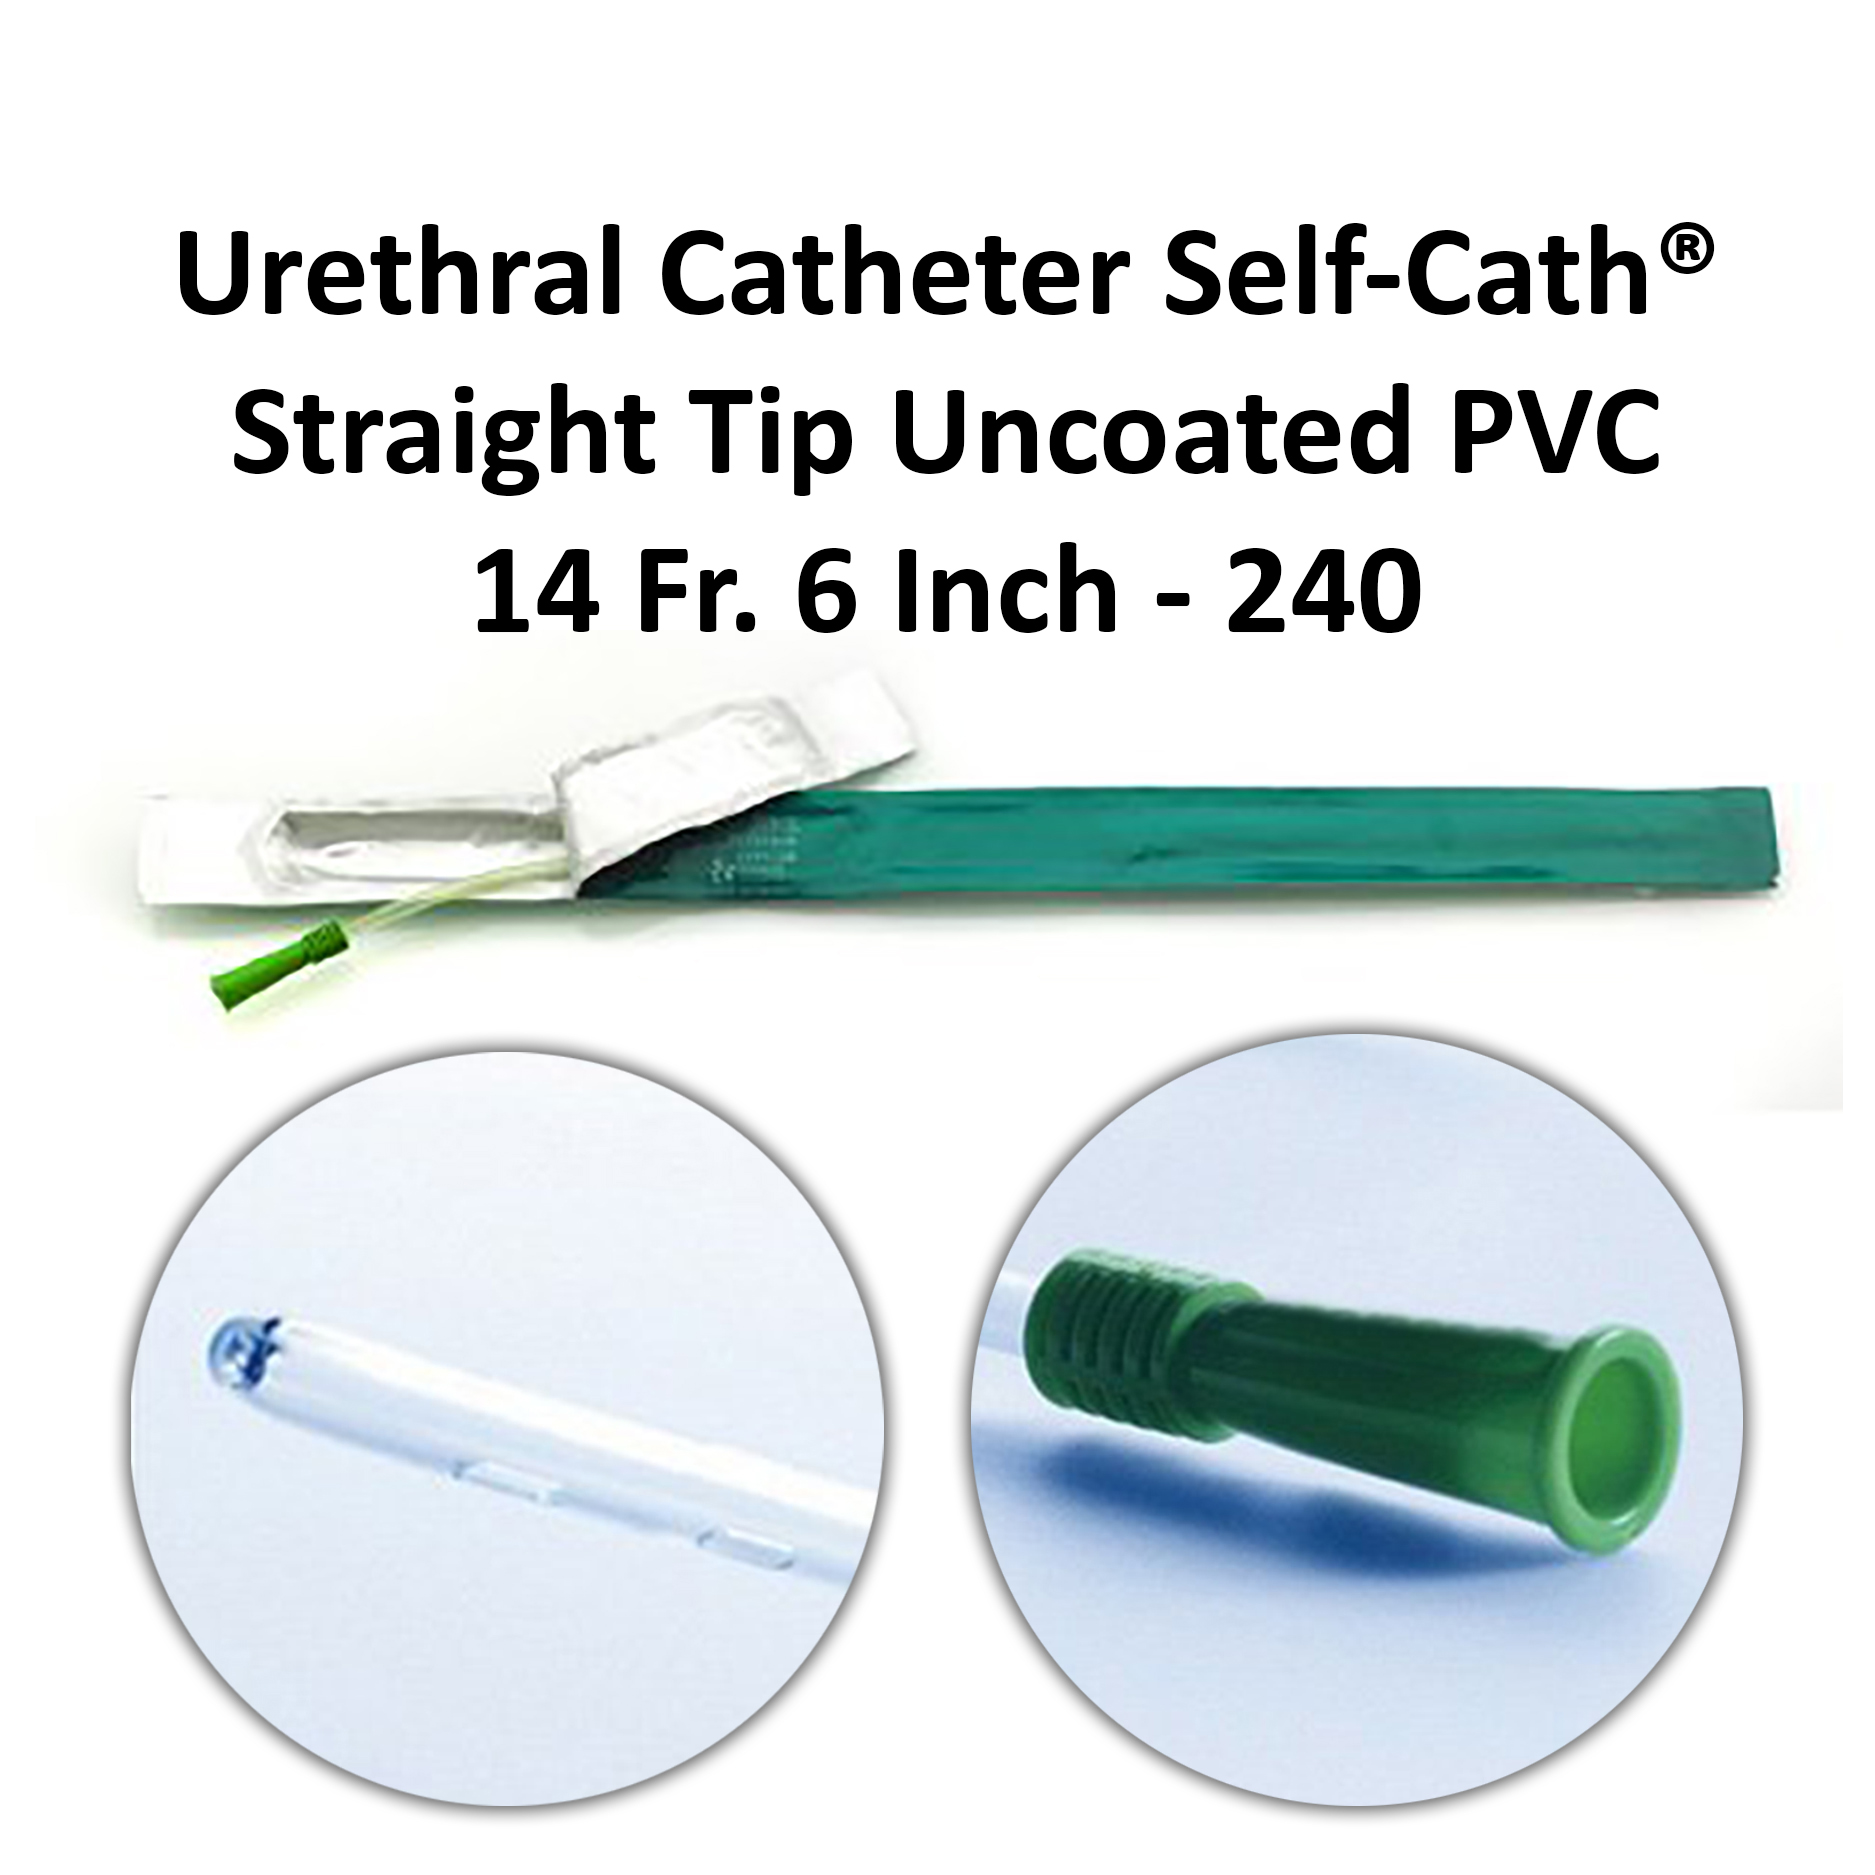 Urethral Catheter Self-Cath® Straight Tip Uncoated PVC 14 Fr. 6 Inch - 240